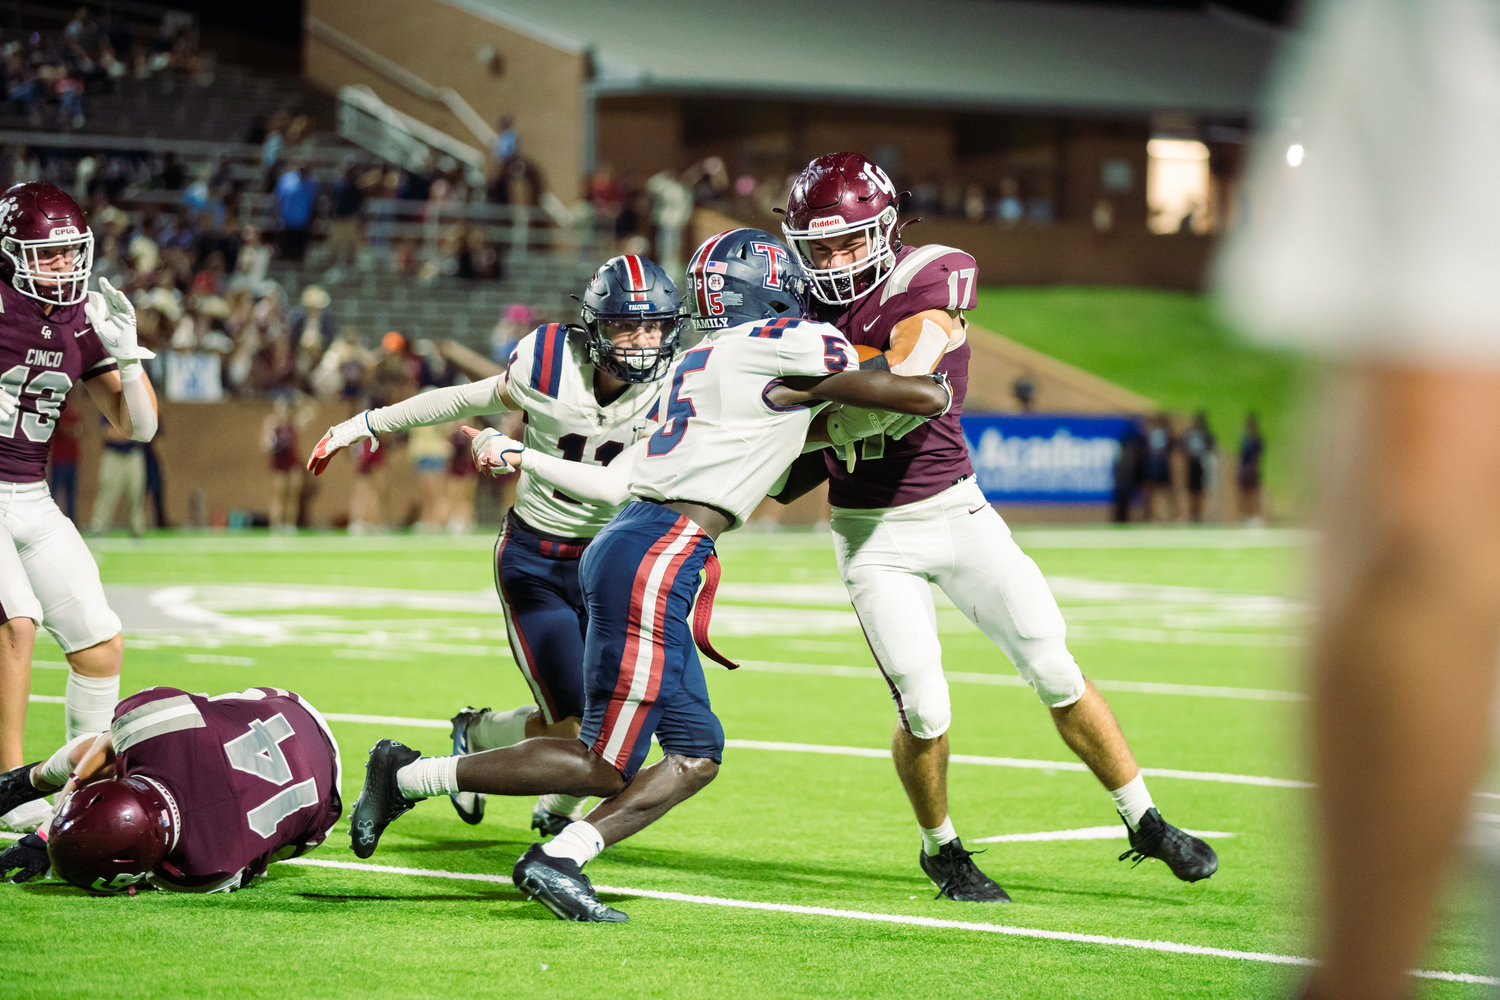 Cinco Ranch’s Eric Eckstrom fights for yardage during Friday’s game between Cinco Ranch and Tompkins at Rhodes Stadium.